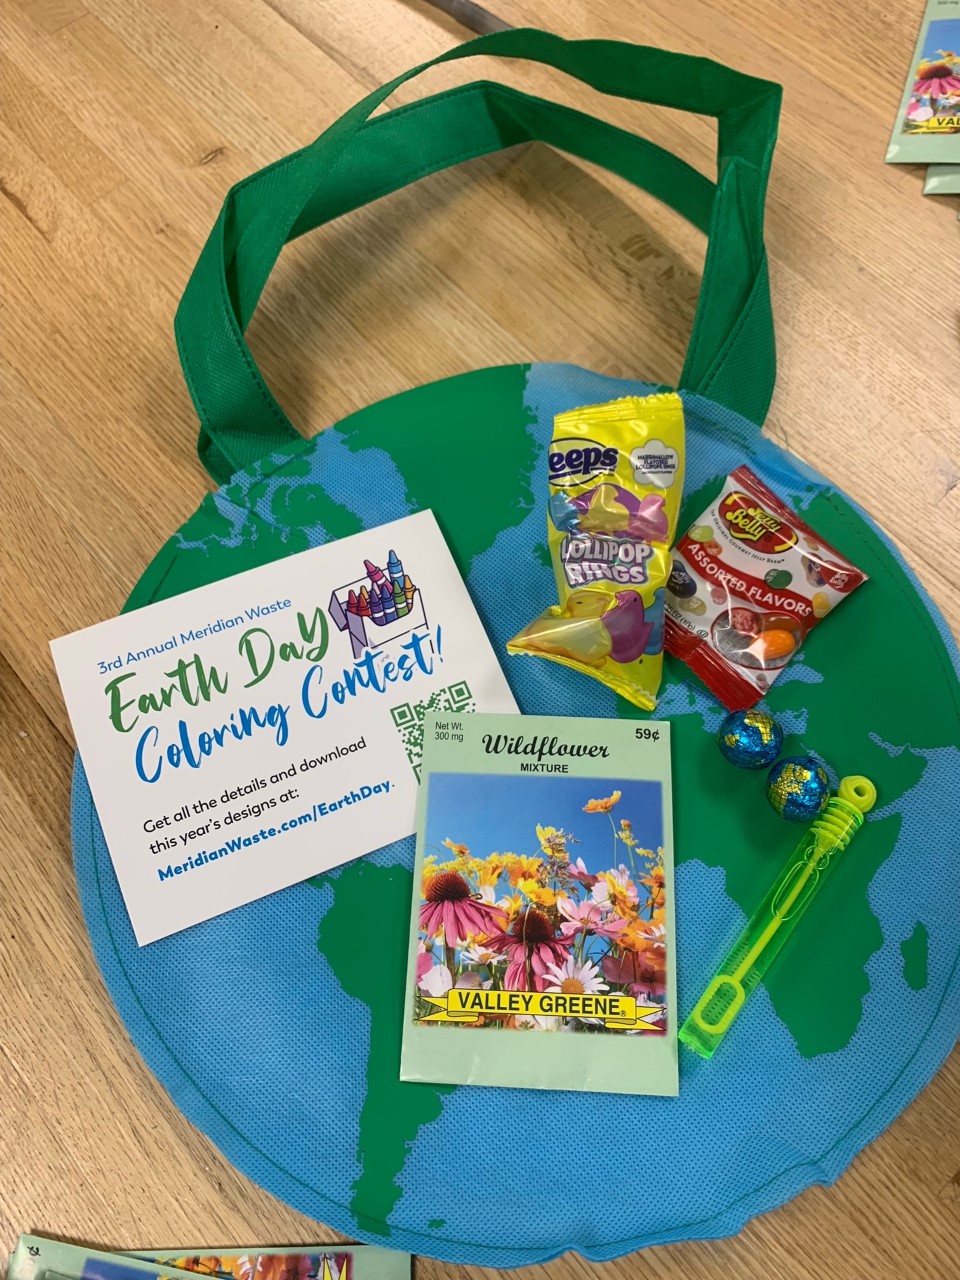 One more day - the Big, Bright, Earth Day Party & Egg Hunt is COMING!